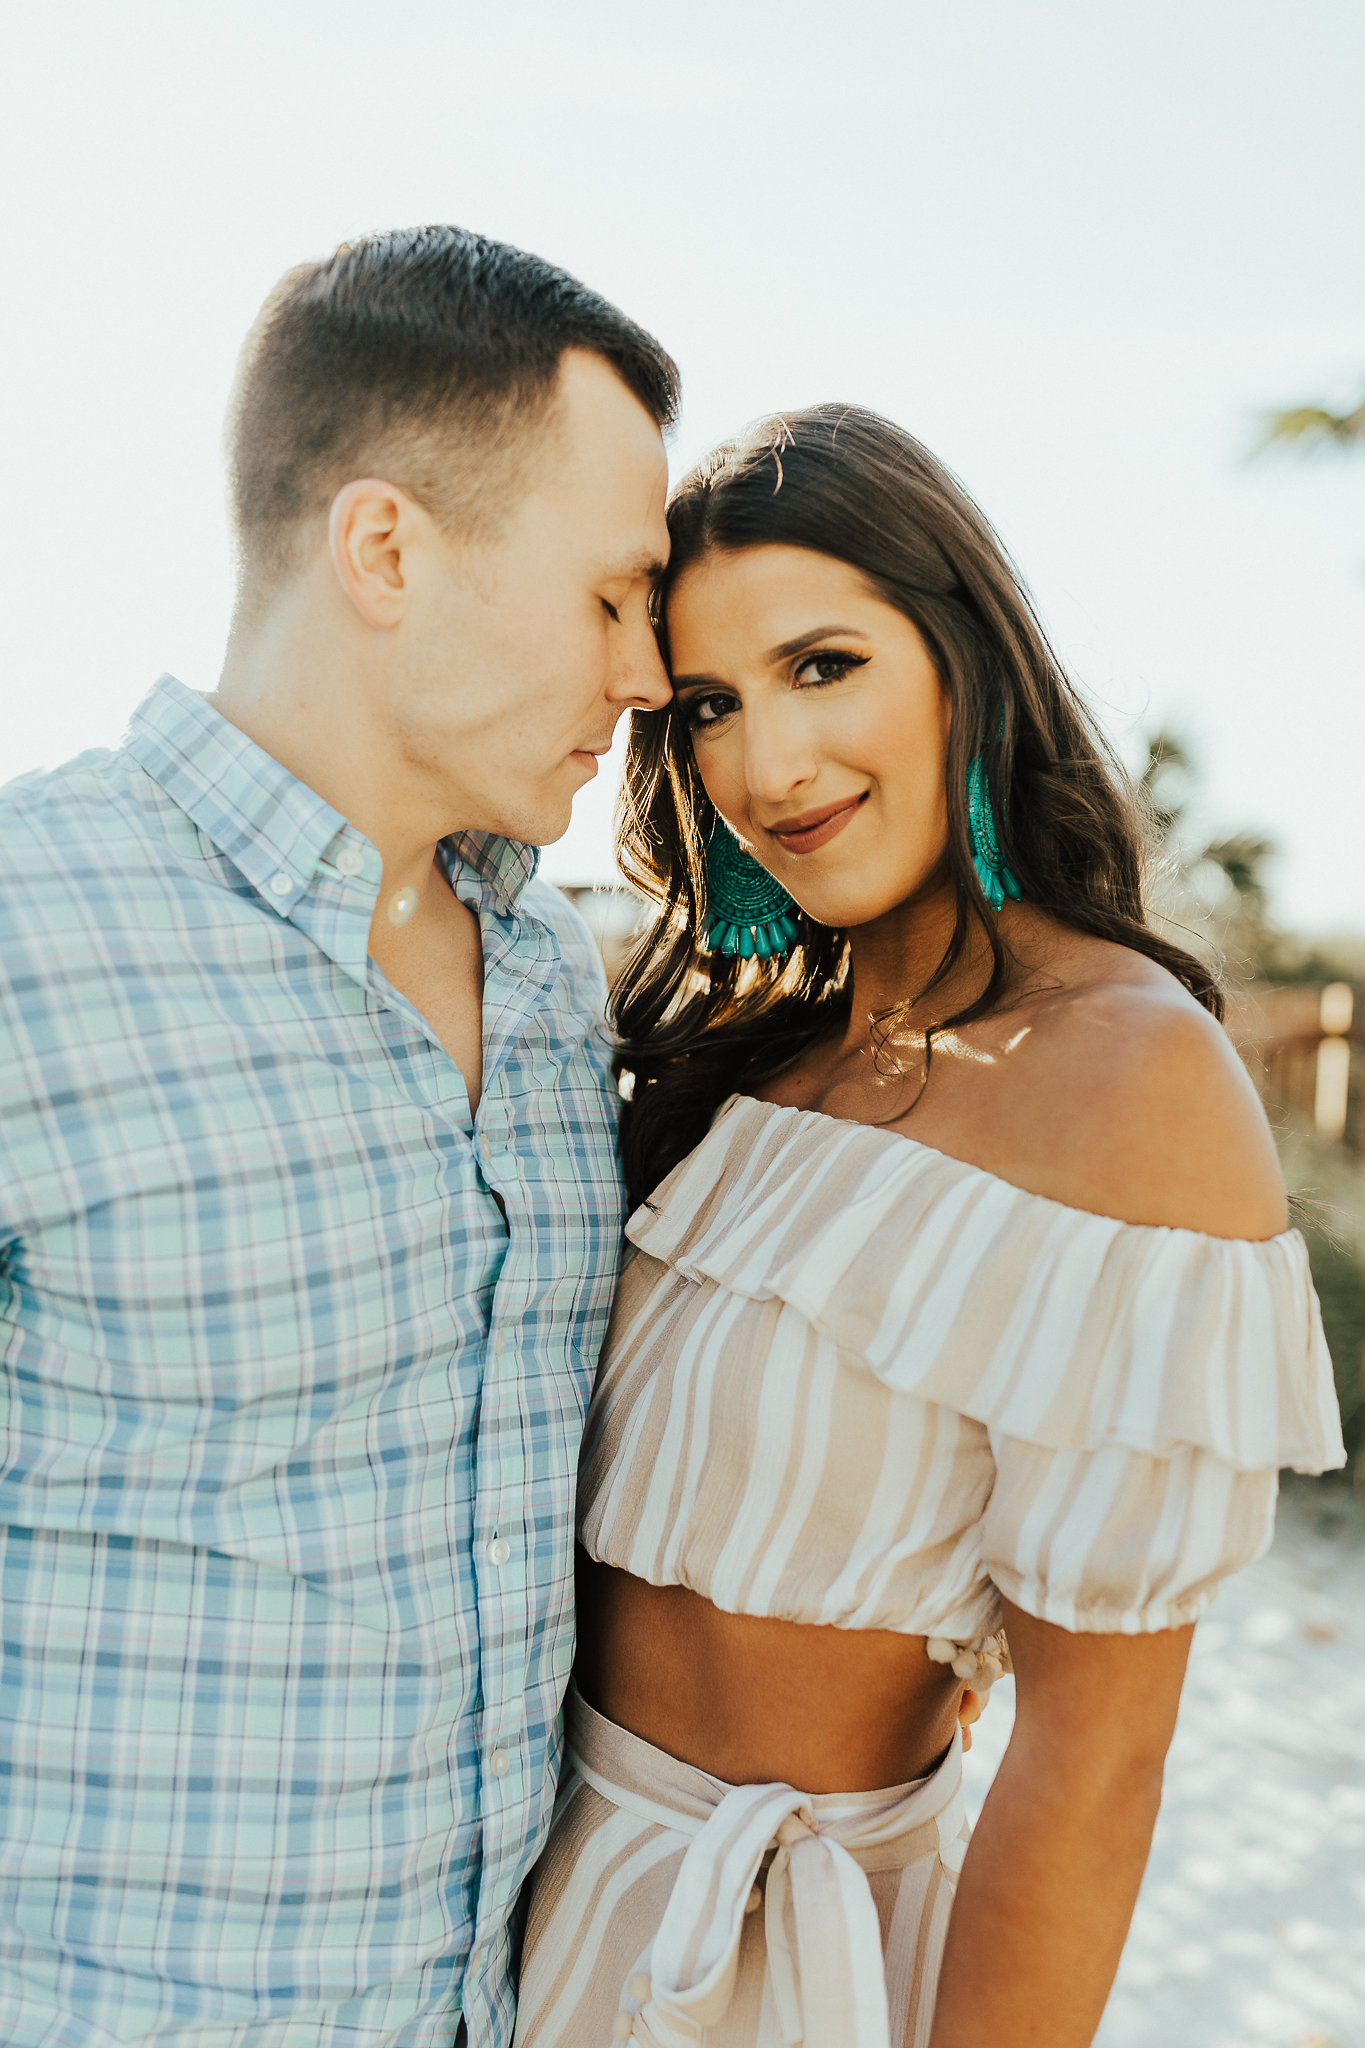 ruffle two piece set, beach style, beach fashion, beach outfits, vacation outfits, couples outfits, couples fashion, two piece set, lovers and friends set, lovers and friends outfits, turquoise earrings, turquoise statement earrings, kenneth jay lane beaded earrings // grace wainwright a southern drawl